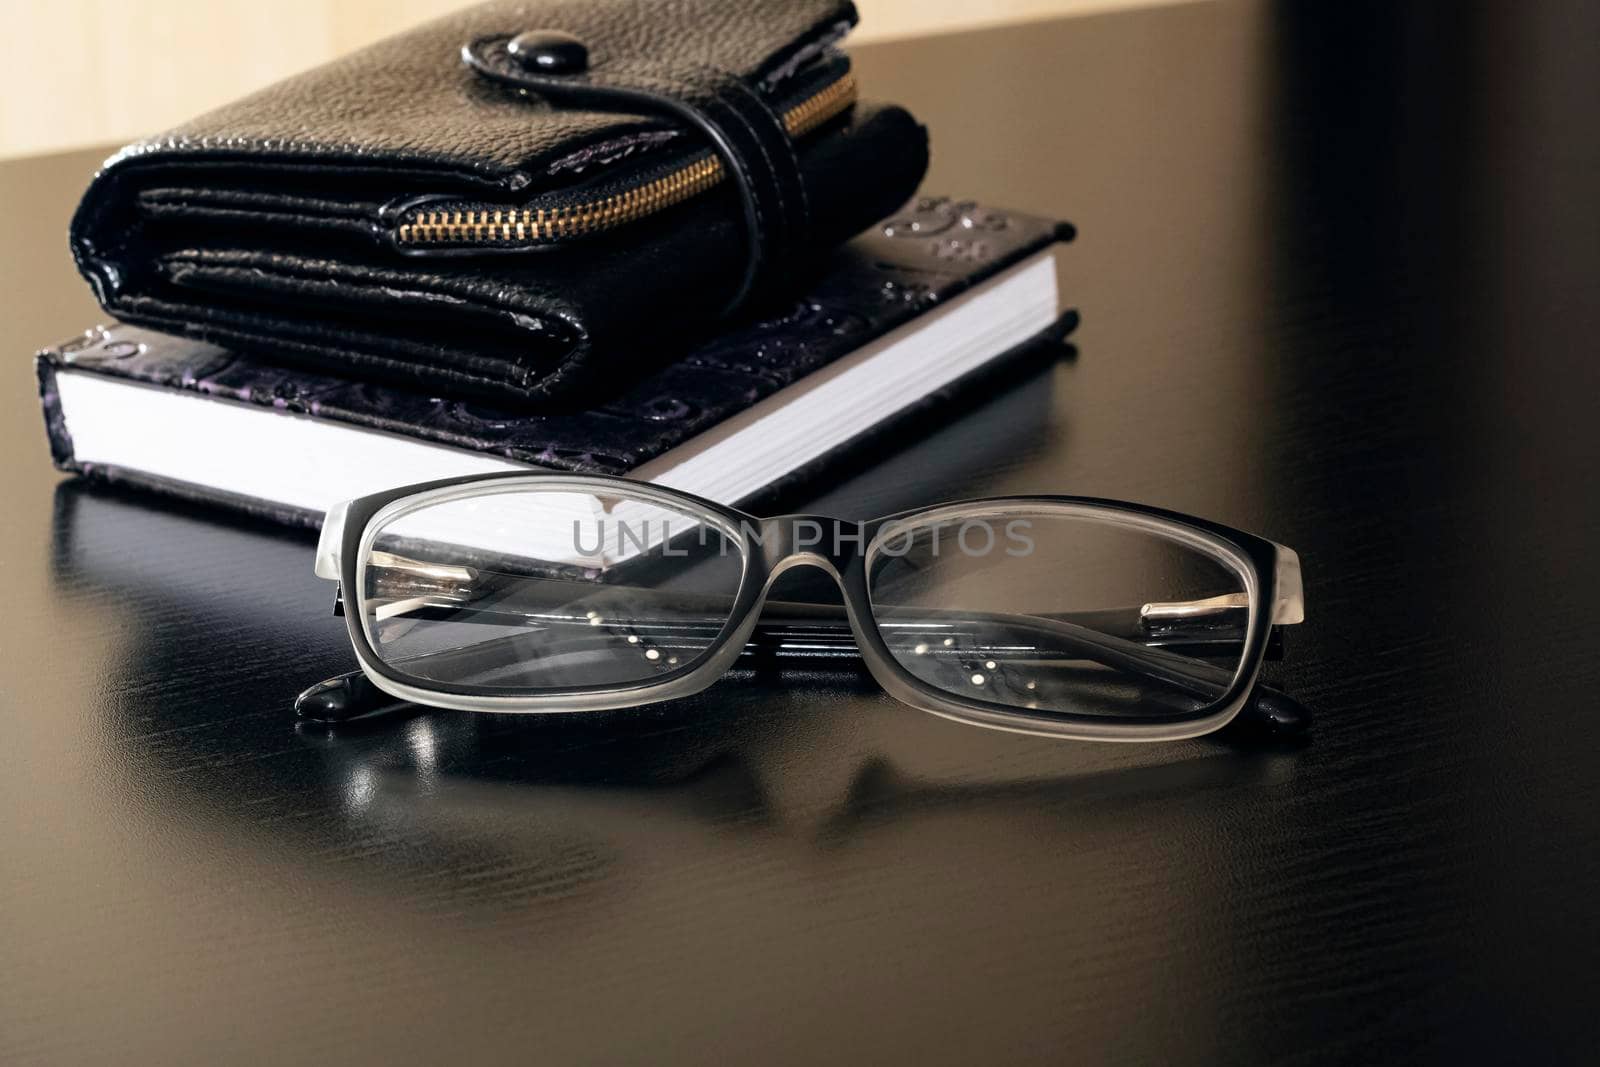 Glasses, wallet and notebook on a wooden table close up